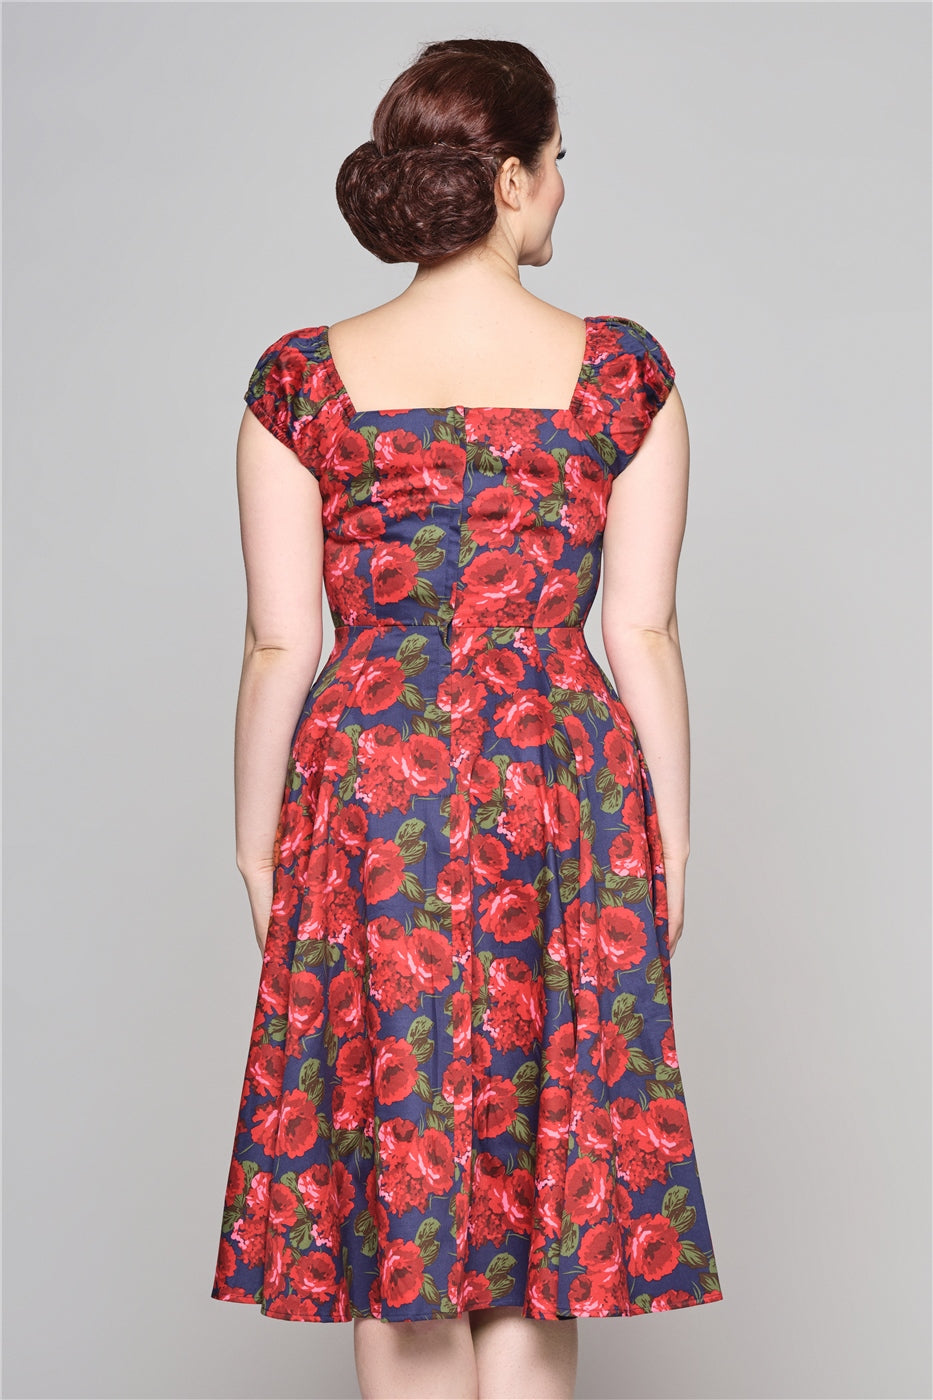 Dolores Roses Doll Dress by Collectif